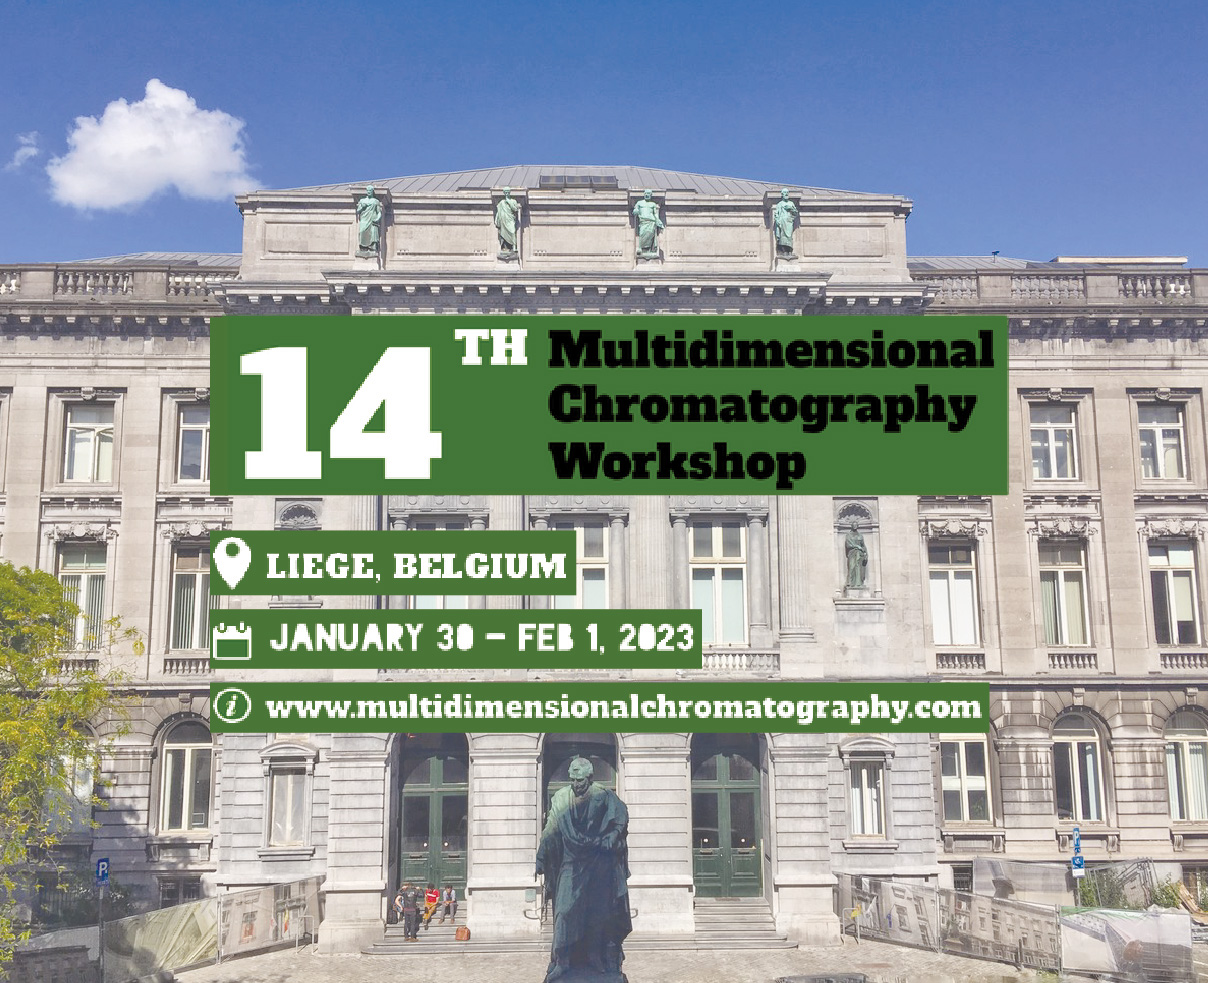 Wrapping up the 14th Multidimensional Chromatography Workshop